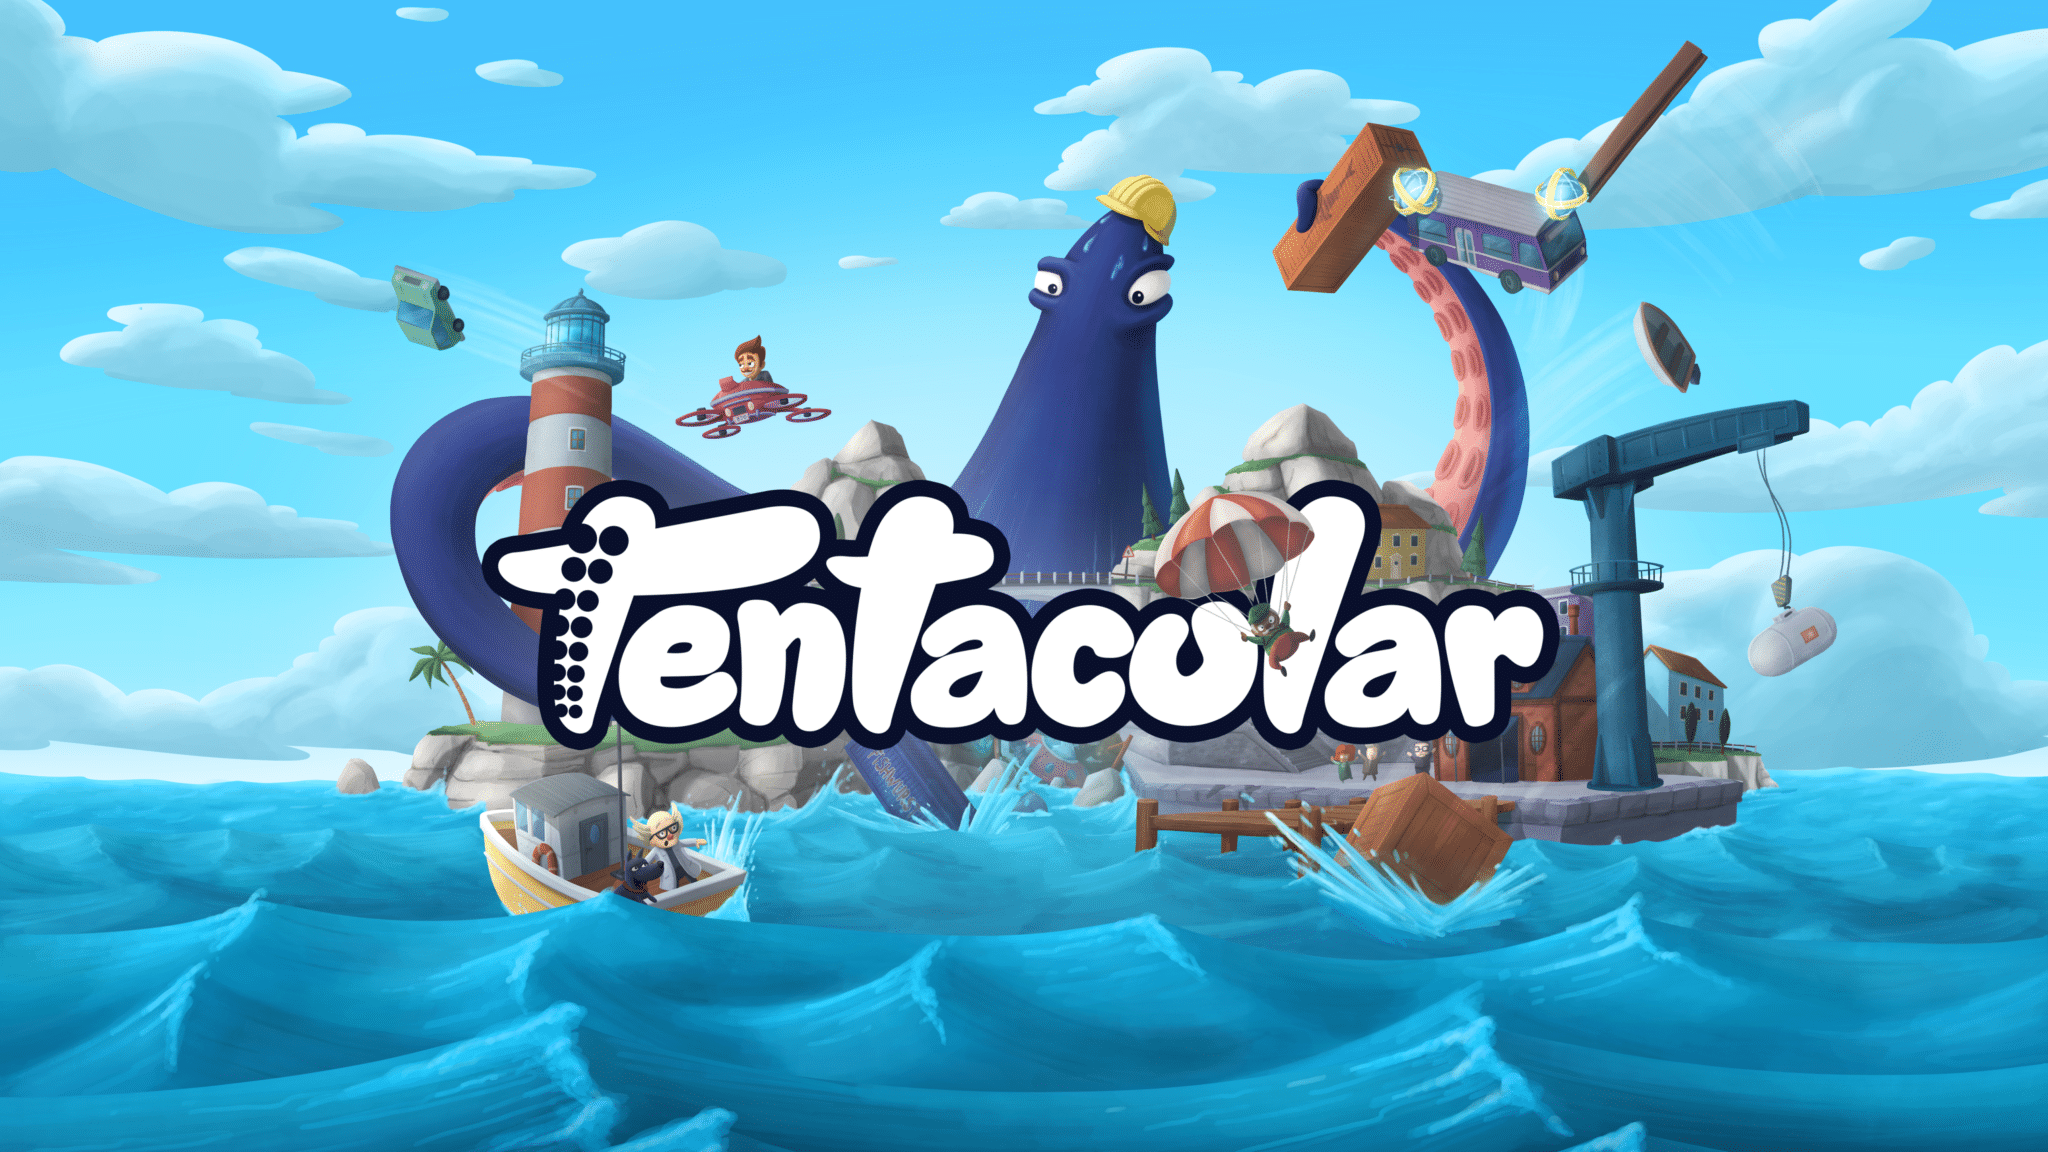 Tentacular' Is the Only Game That Does VR Right